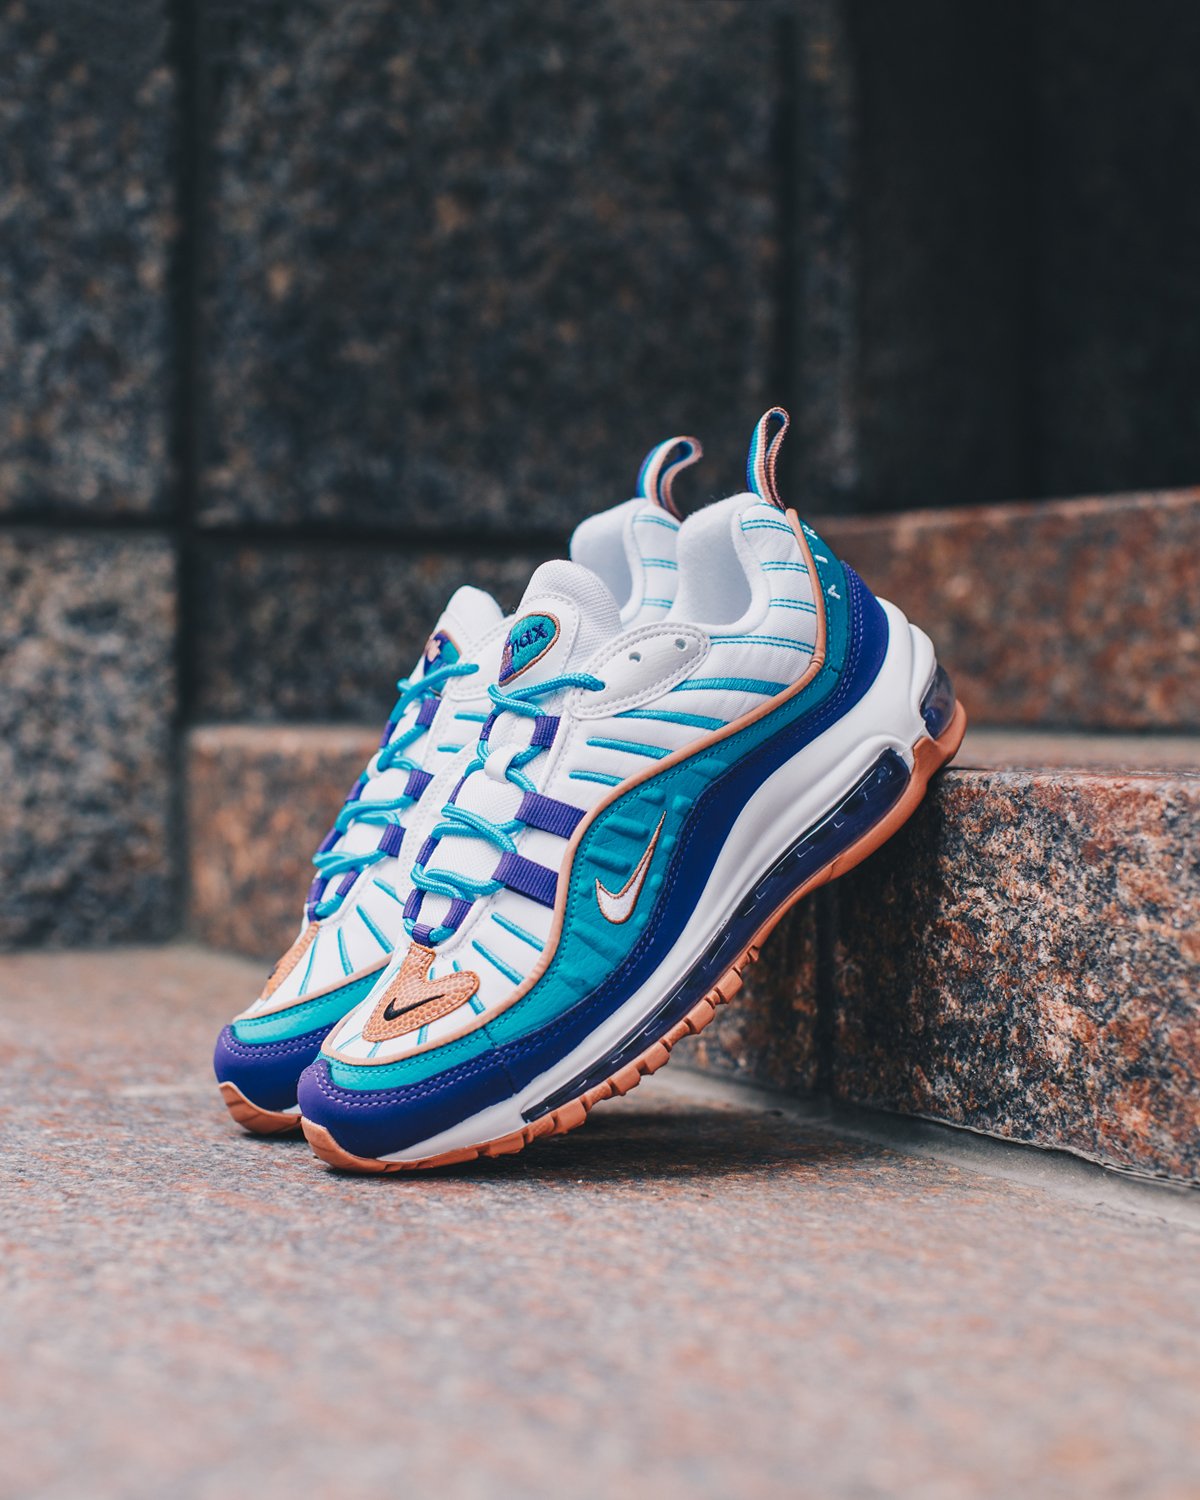 cuestionario rociar Respetuoso DTLR on Twitter: "The #Nike Air Max 98 GS Spirit Teal/Court Purple is now  available in-store and online. Link to cop: https://t.co/fLd5uEUpXW  https://t.co/ZZOySbeBk4" / Twitter